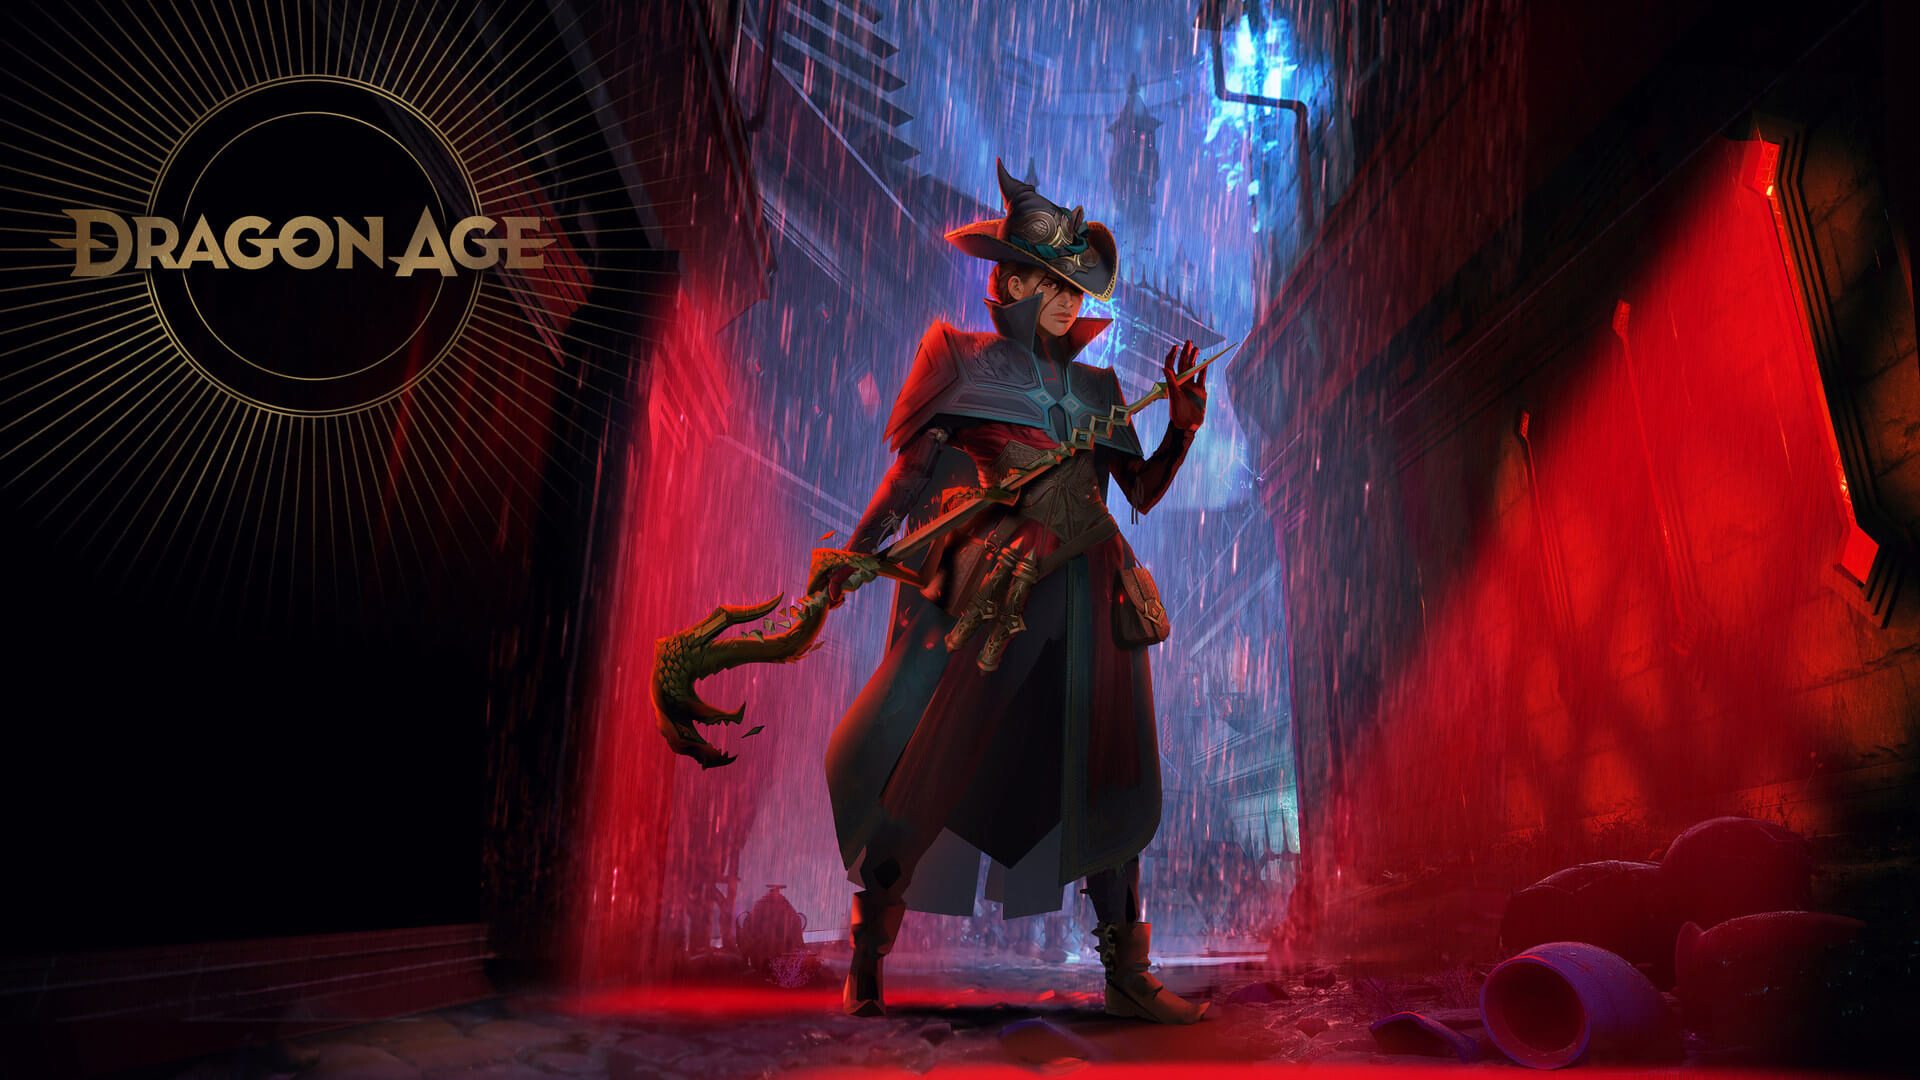 Bioware shares a new concept of art for Dragon Age